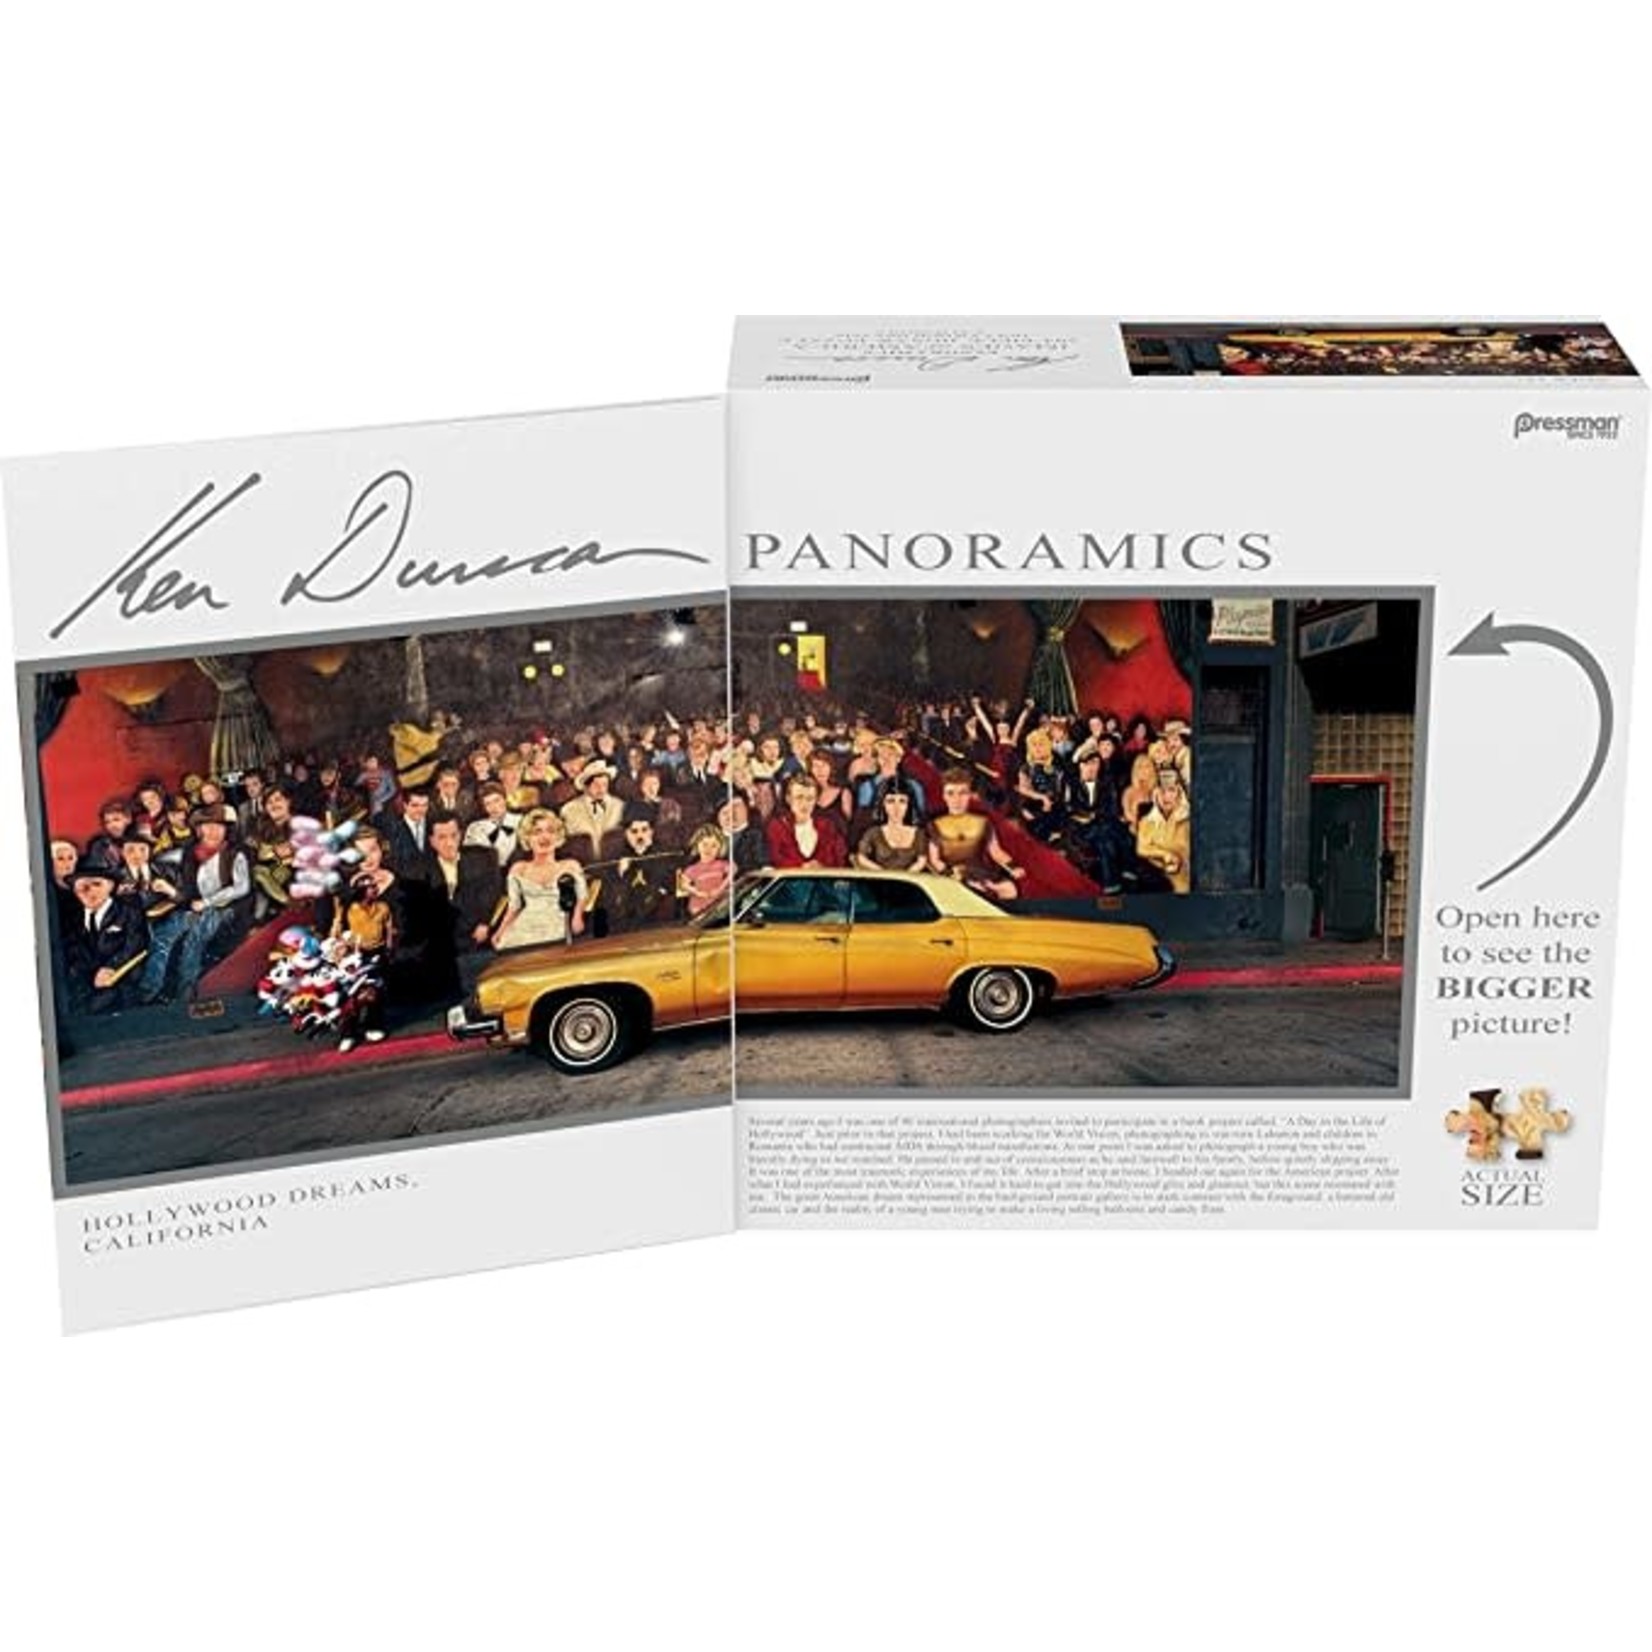 Images of America Hollywood Dreams 504 Piece Puzzle